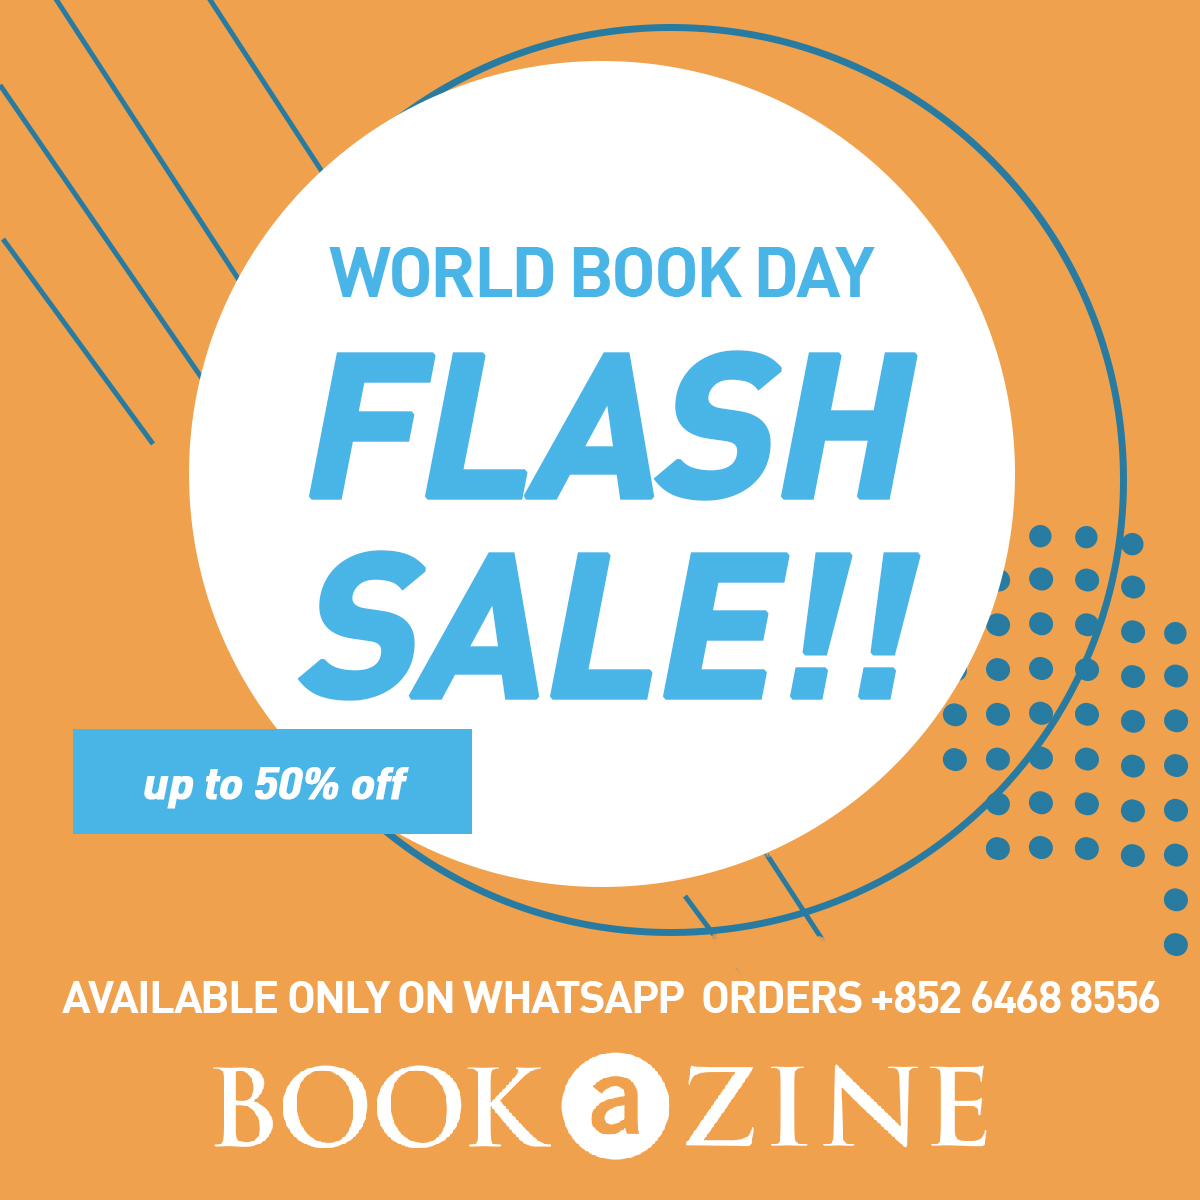 FLASH SALE...ON NOW! ⚡️ Enjoy up to 50% off this curated selection that includes books for all ages.